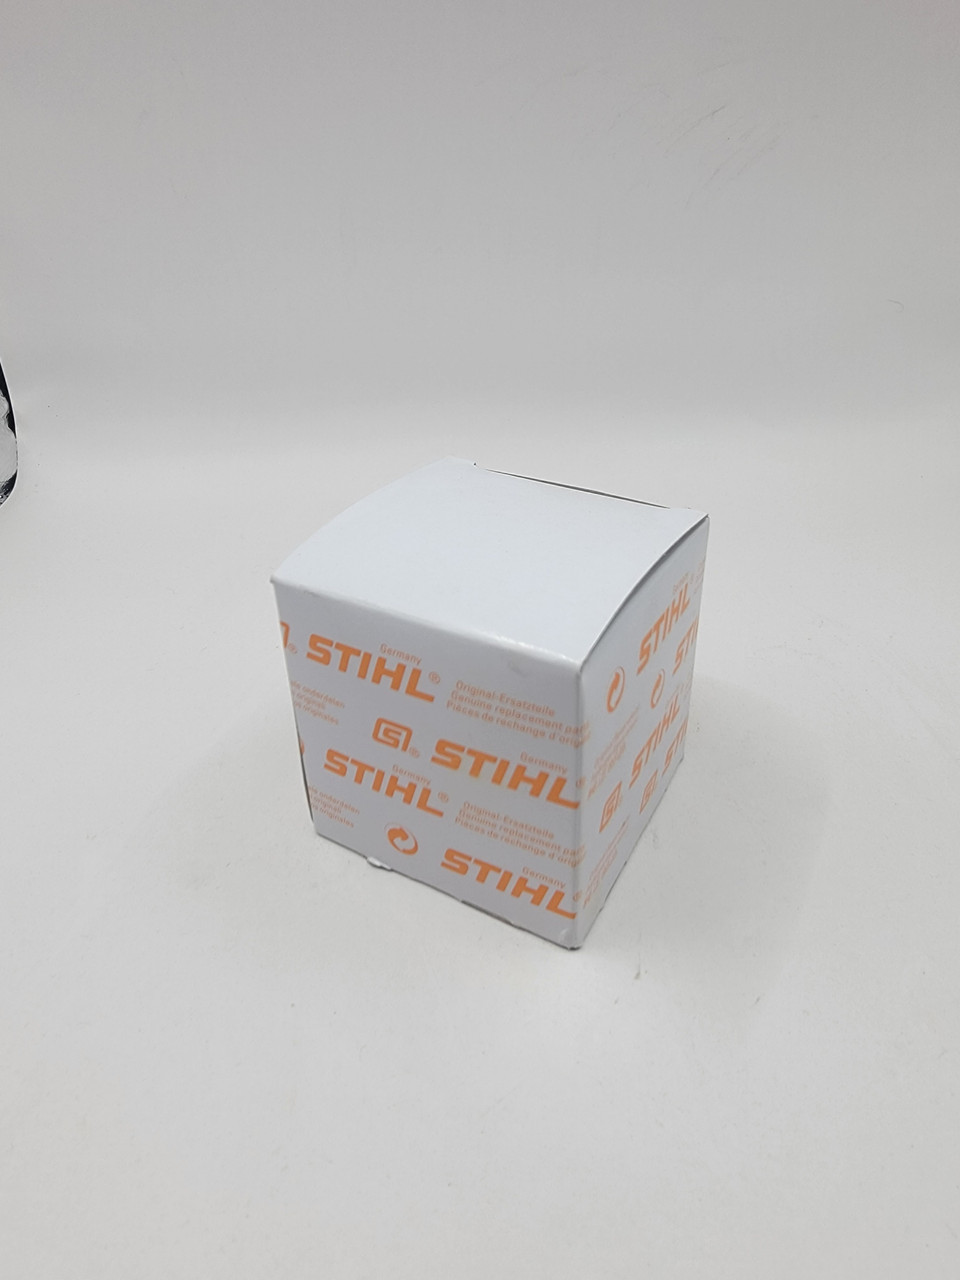 Stihl 4203 708 9300 WASHER one package